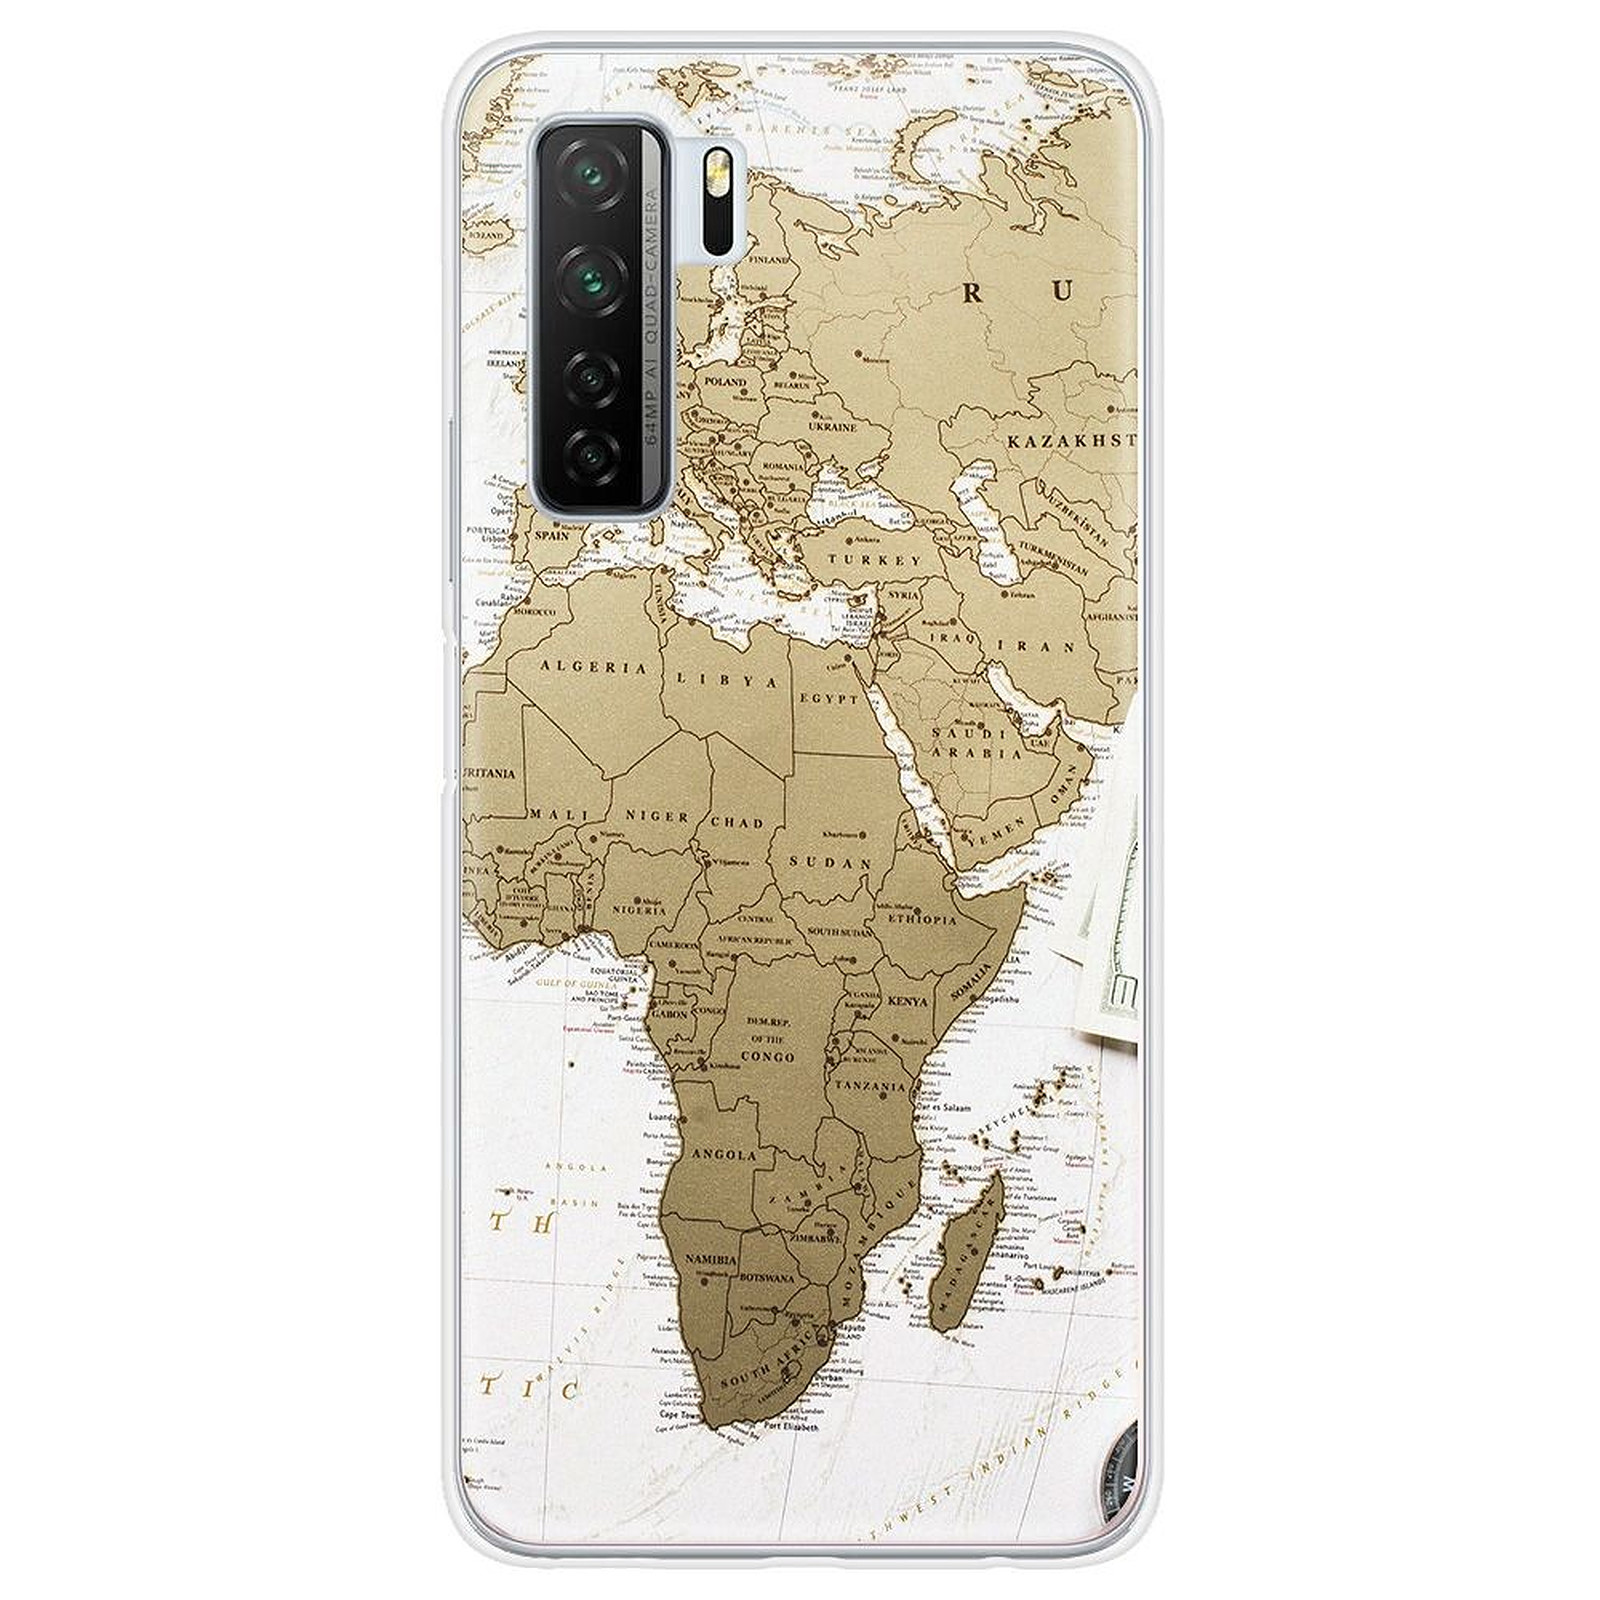 1001 Coques Coque silicone gel Huawei P40 Lite 5G motif Map Europe Afrique - Coque telephone 1001Coques